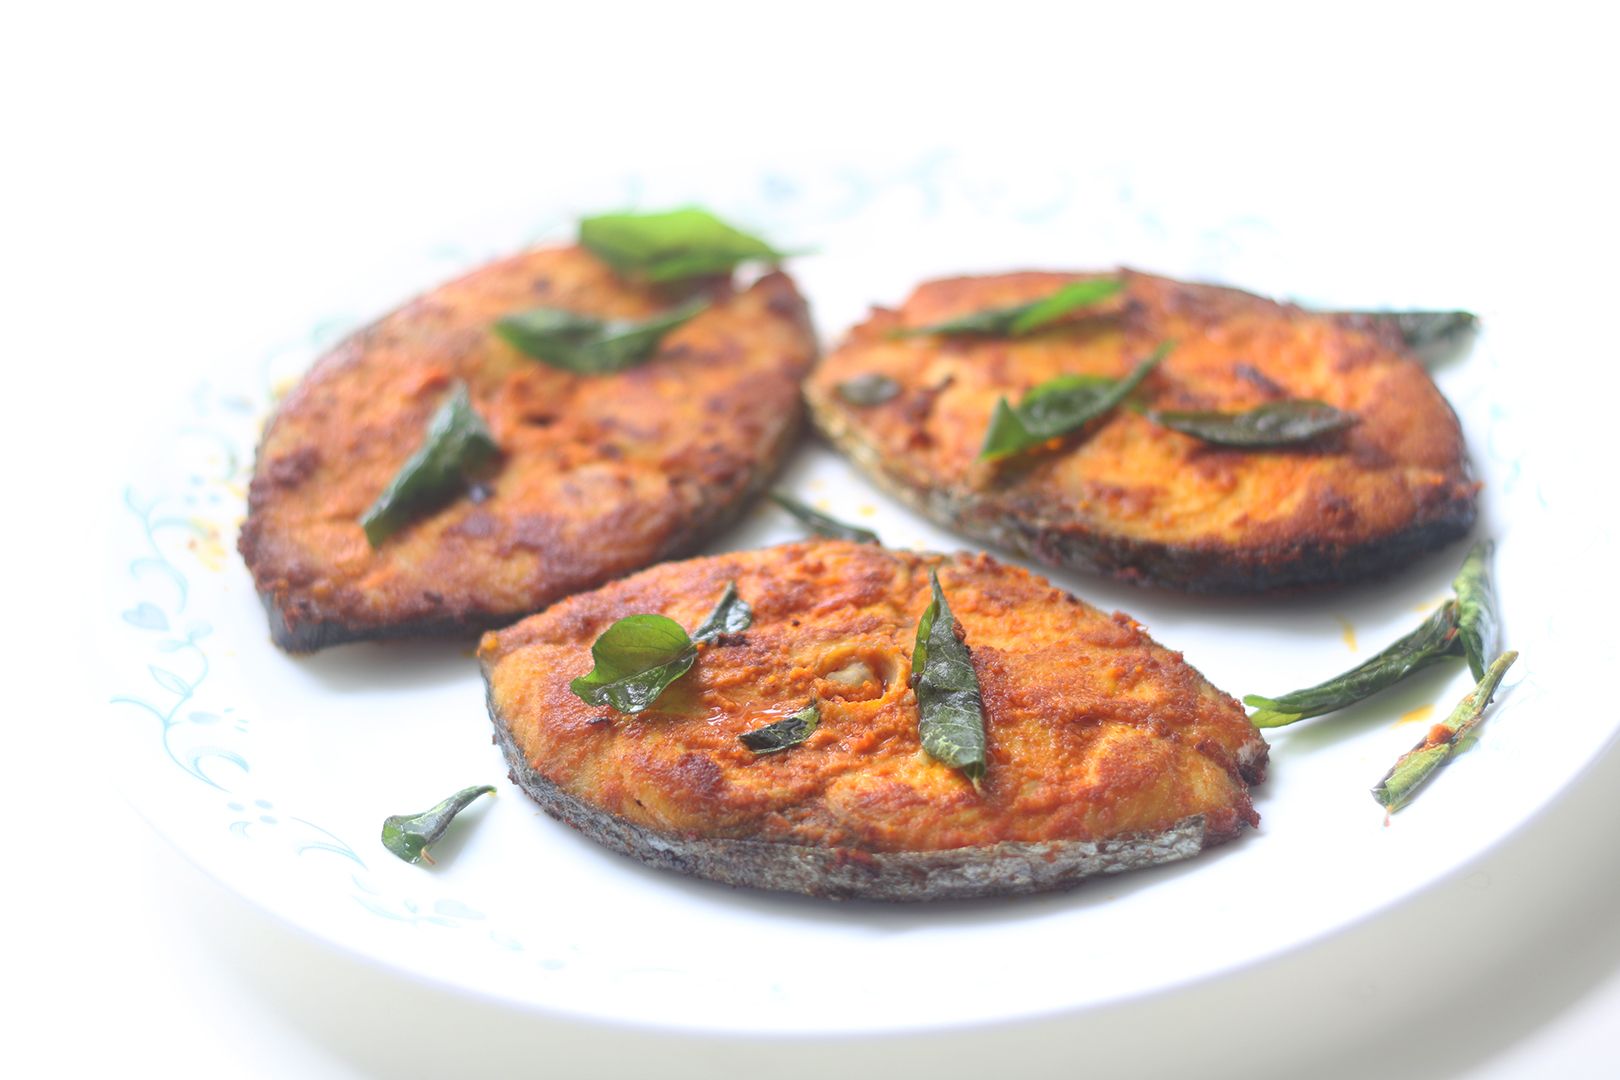 Pan Fried King Fish Steak Recipe - Healthy Fish Fry - The Indian Claypot